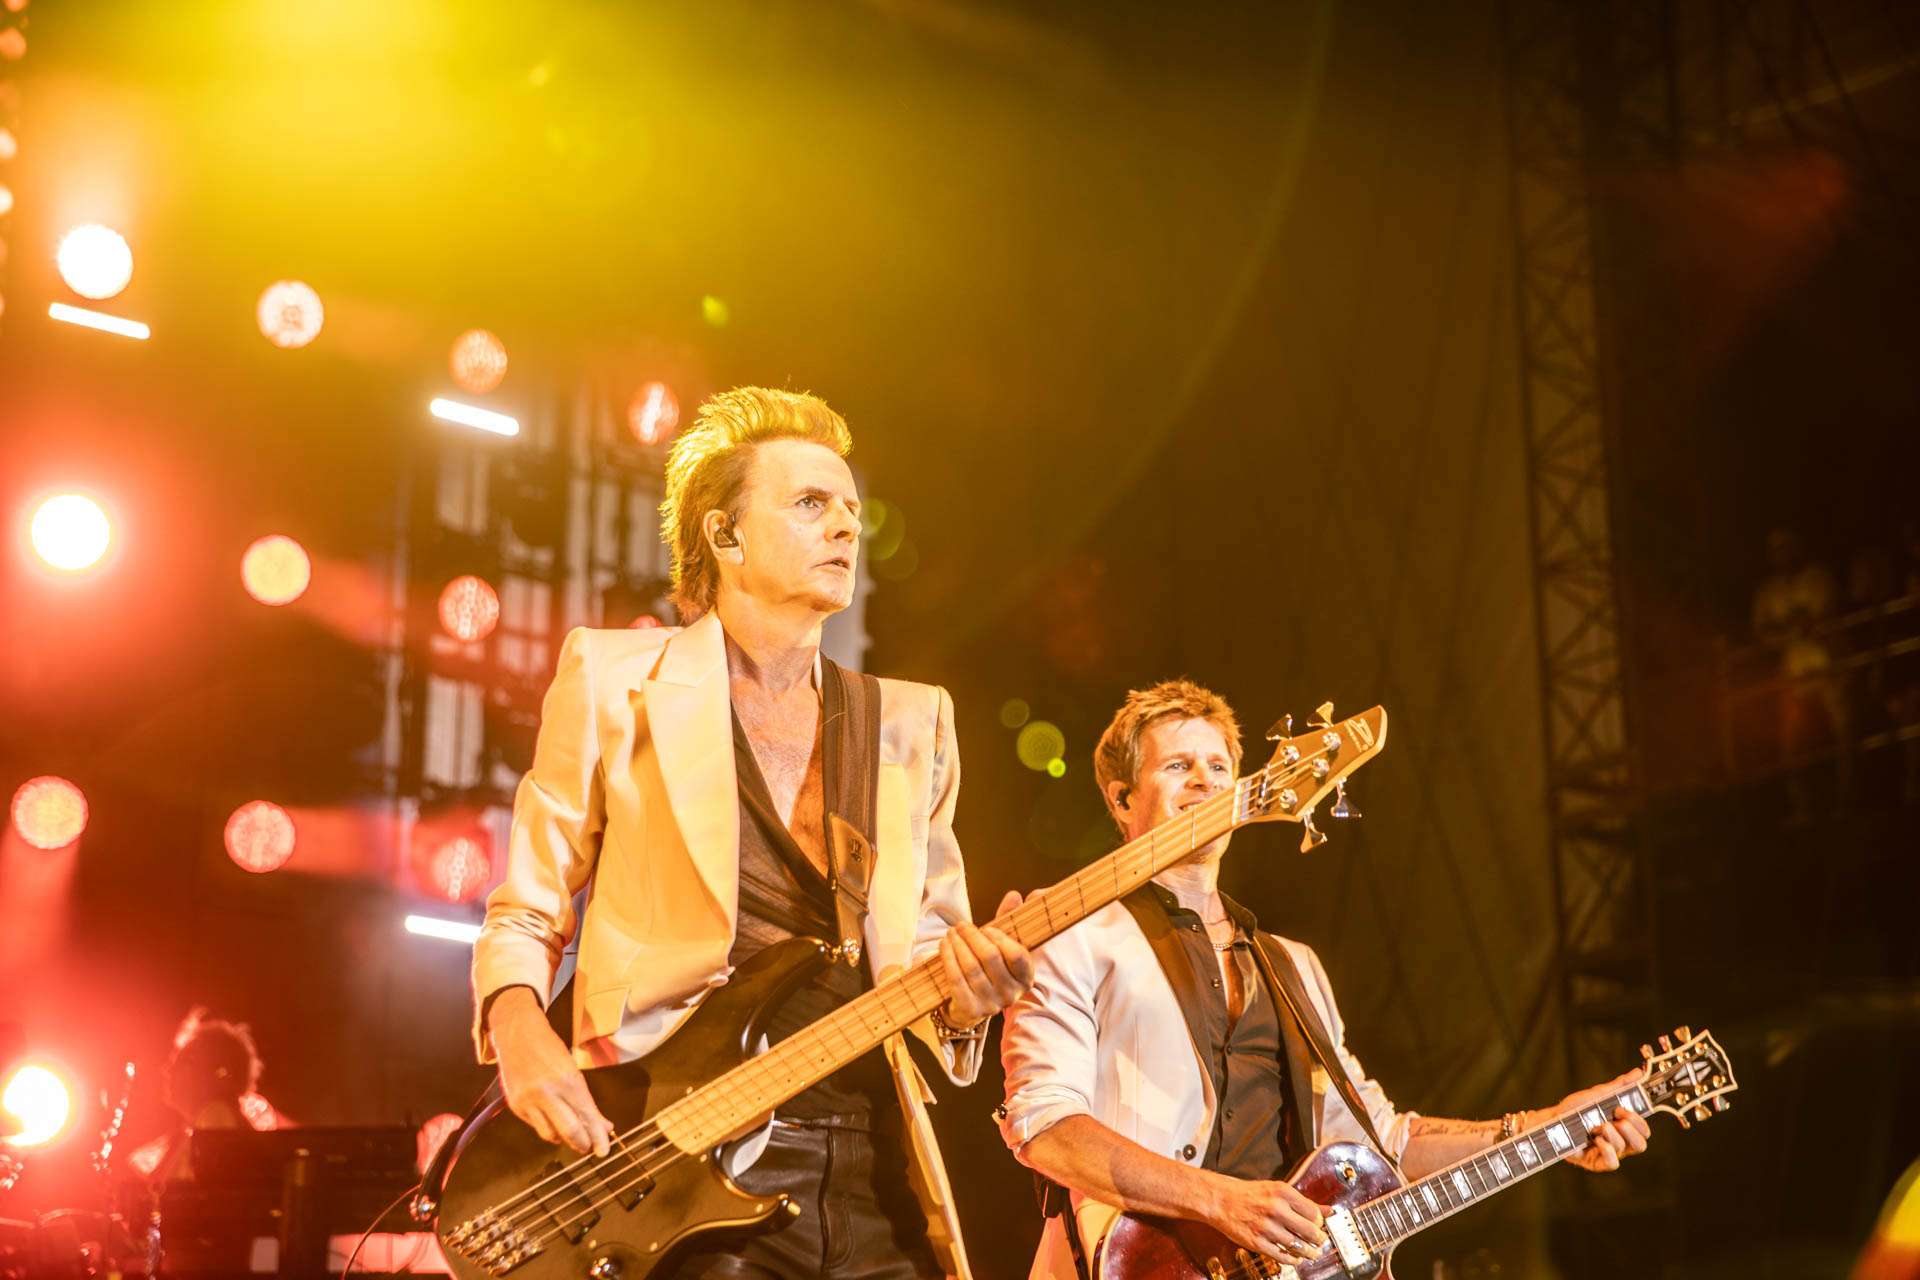 The Sound Of A Good Time: Duran Duran at Huntington Bank Pavilion [REVIEW] 4